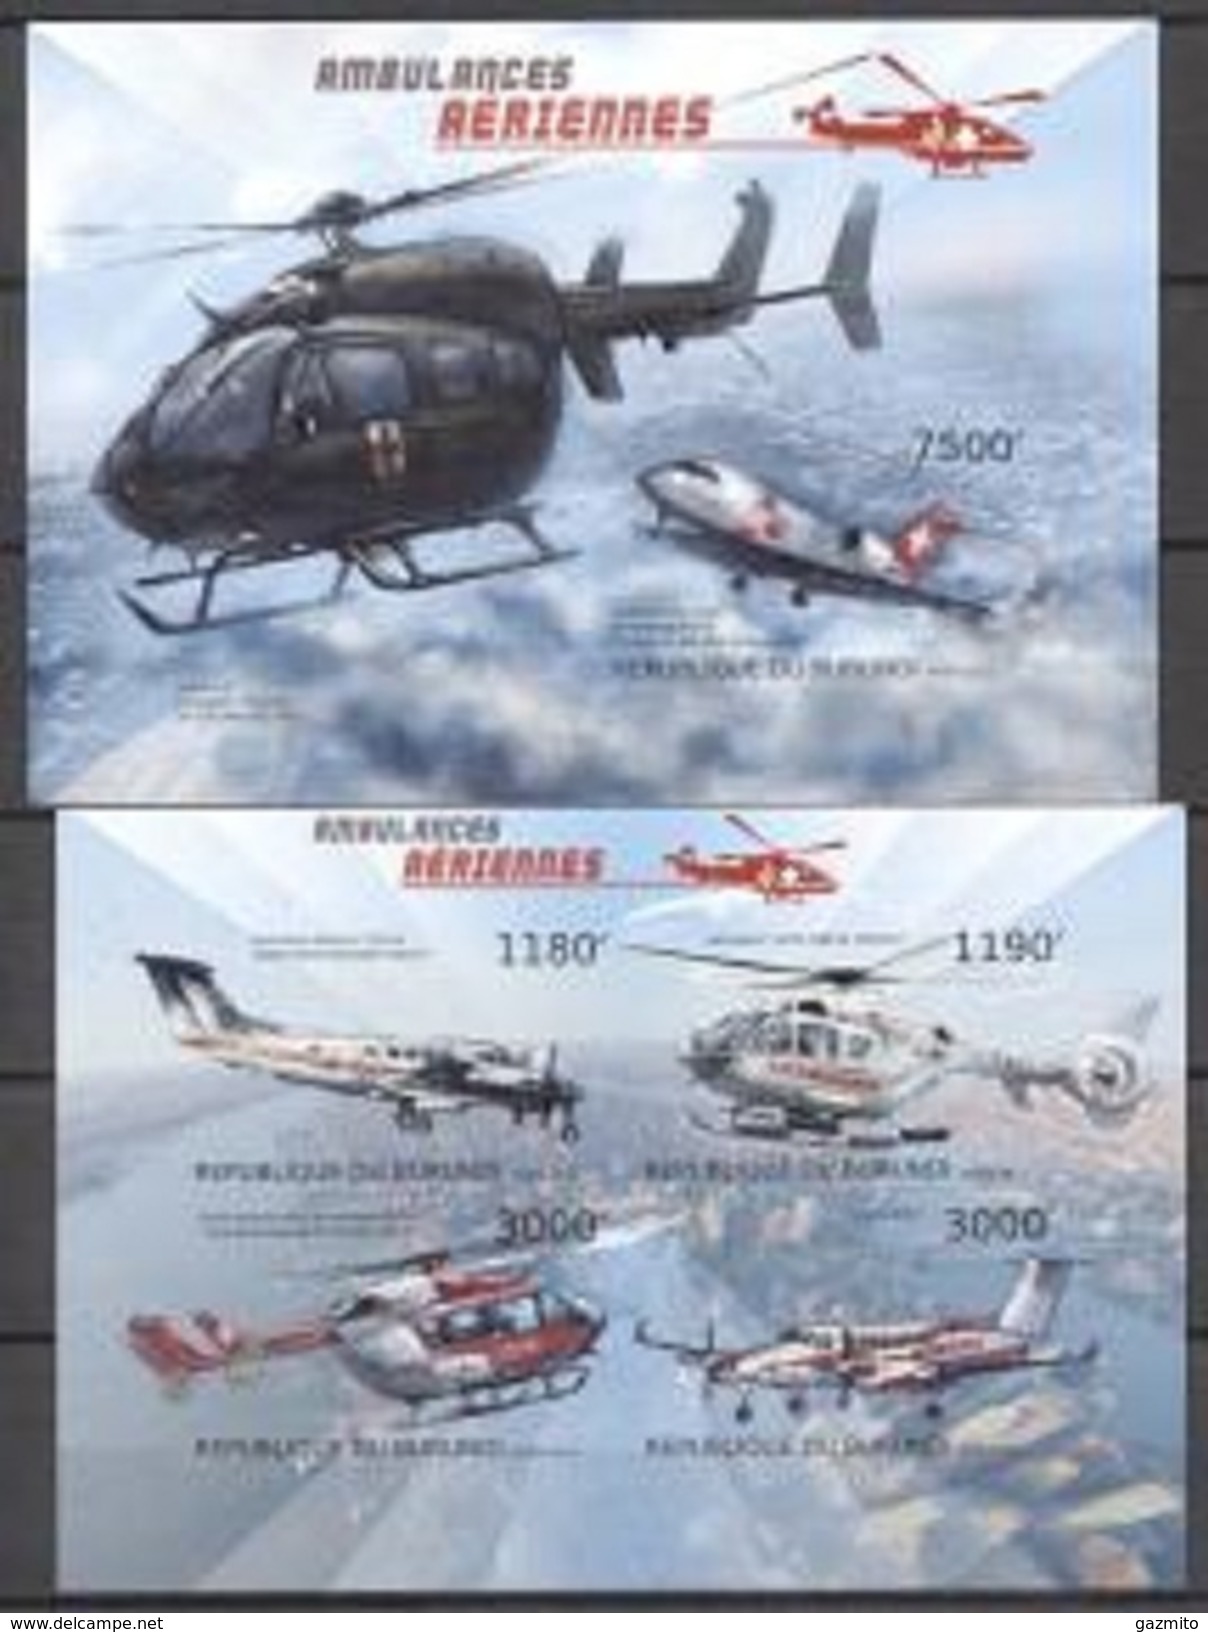 Burundi 2012, Transport, Elicopters, Red Cross, 4val In BF+BF IMPERFORATED - Neufs